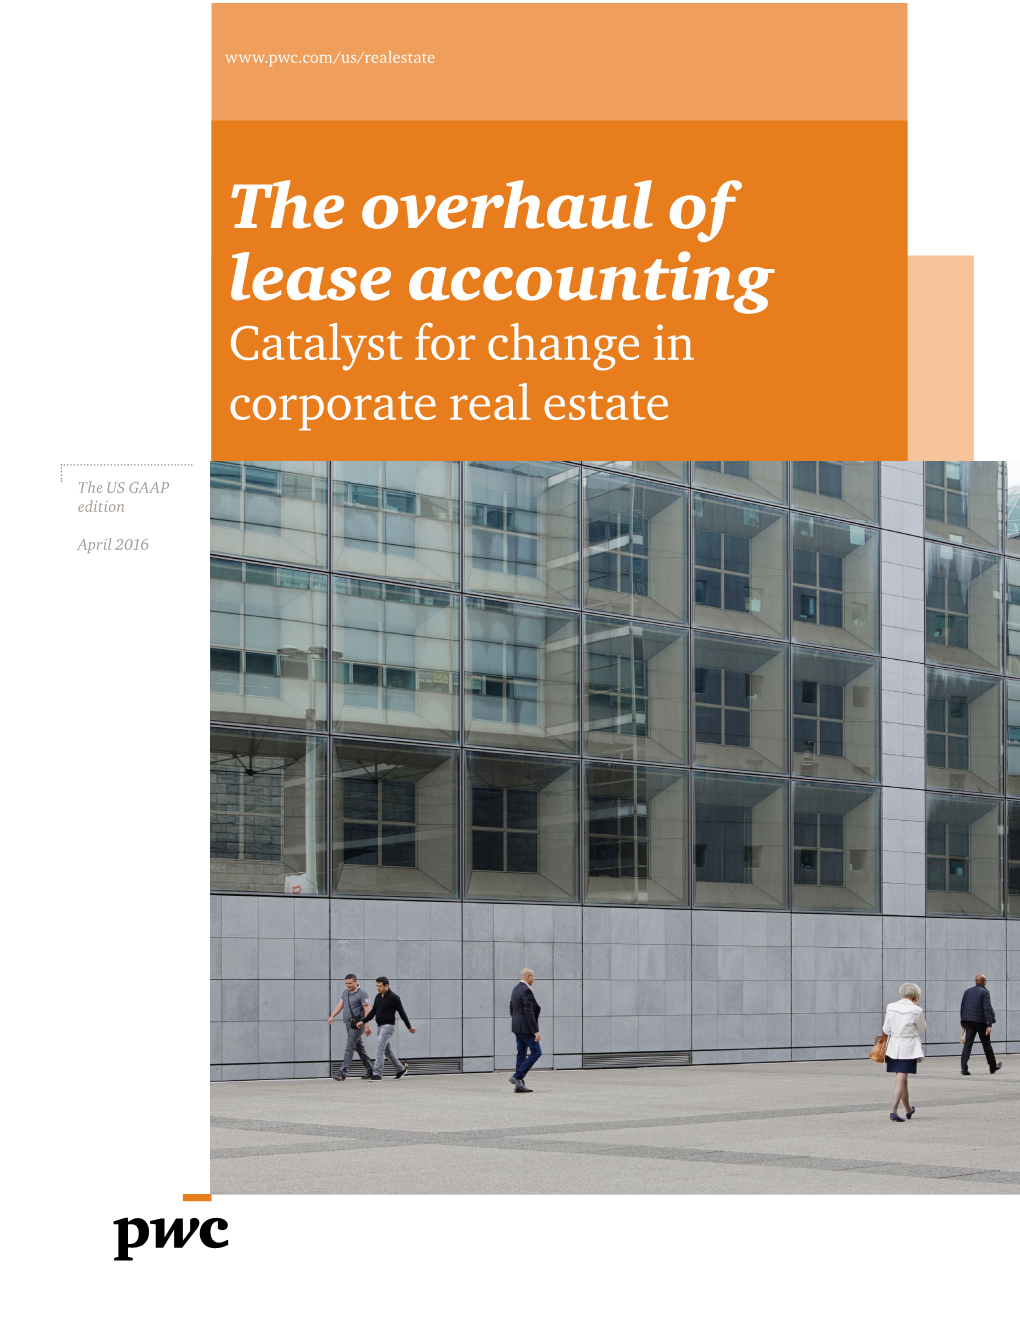 The Overhaul of Lease Accounting Catalyst for Change in Corporate Real Estate